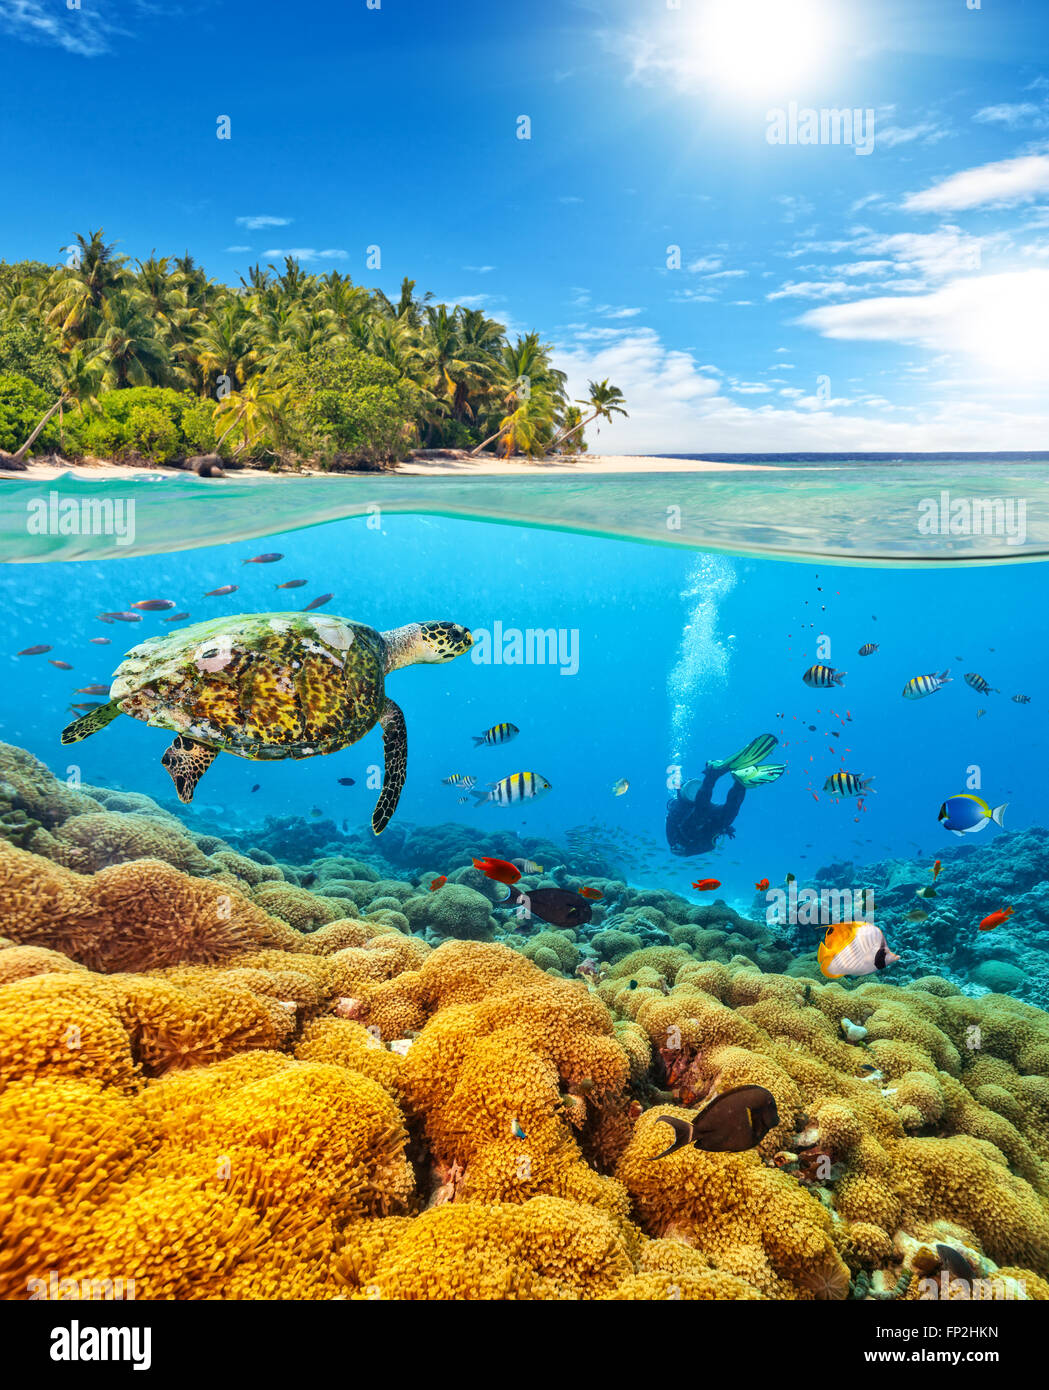 Underwater photography with tropical island Stock Photo